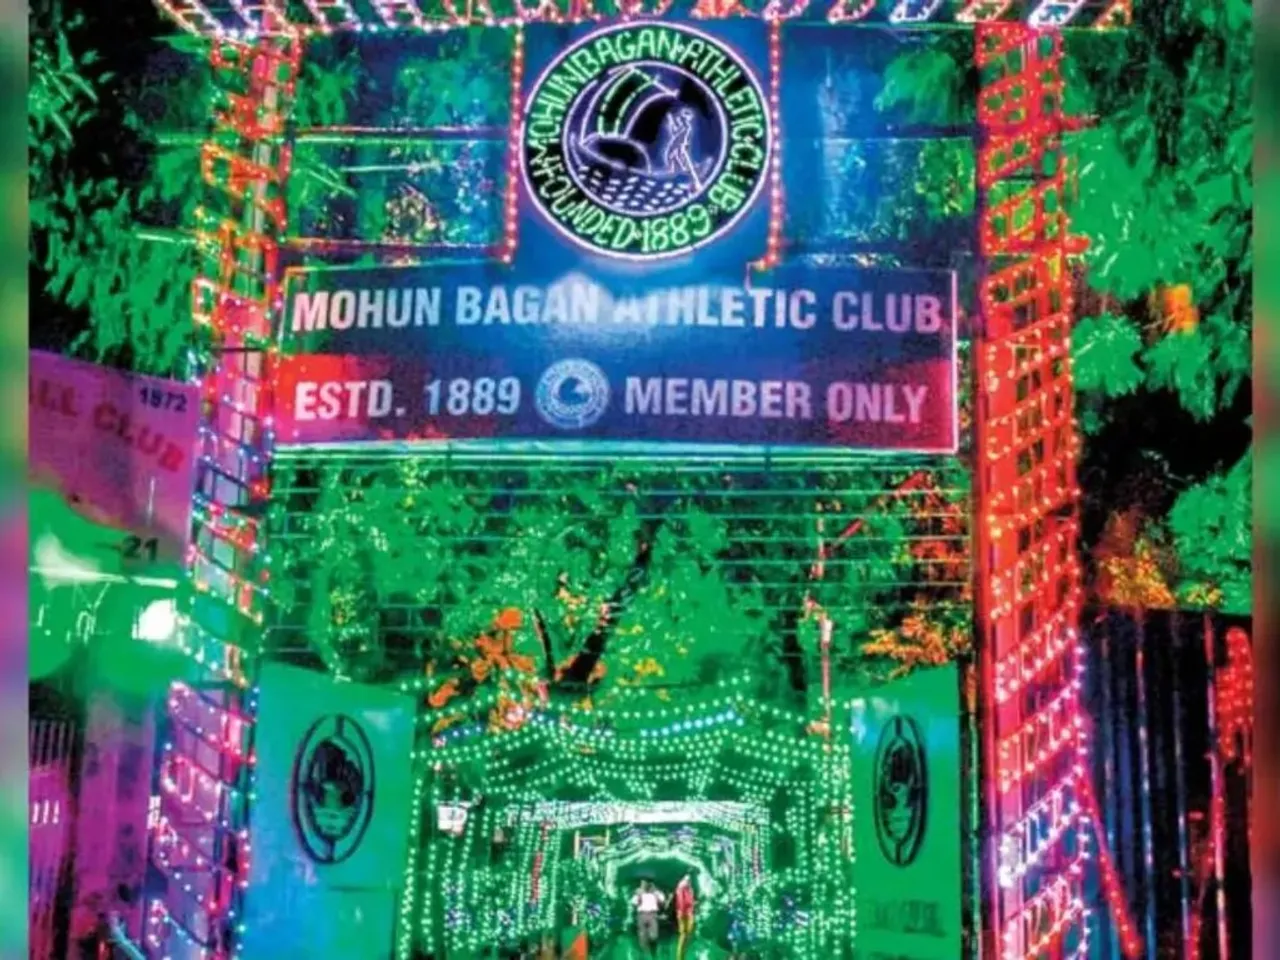 Mohun Bagan Day to be Celebrated on July 29